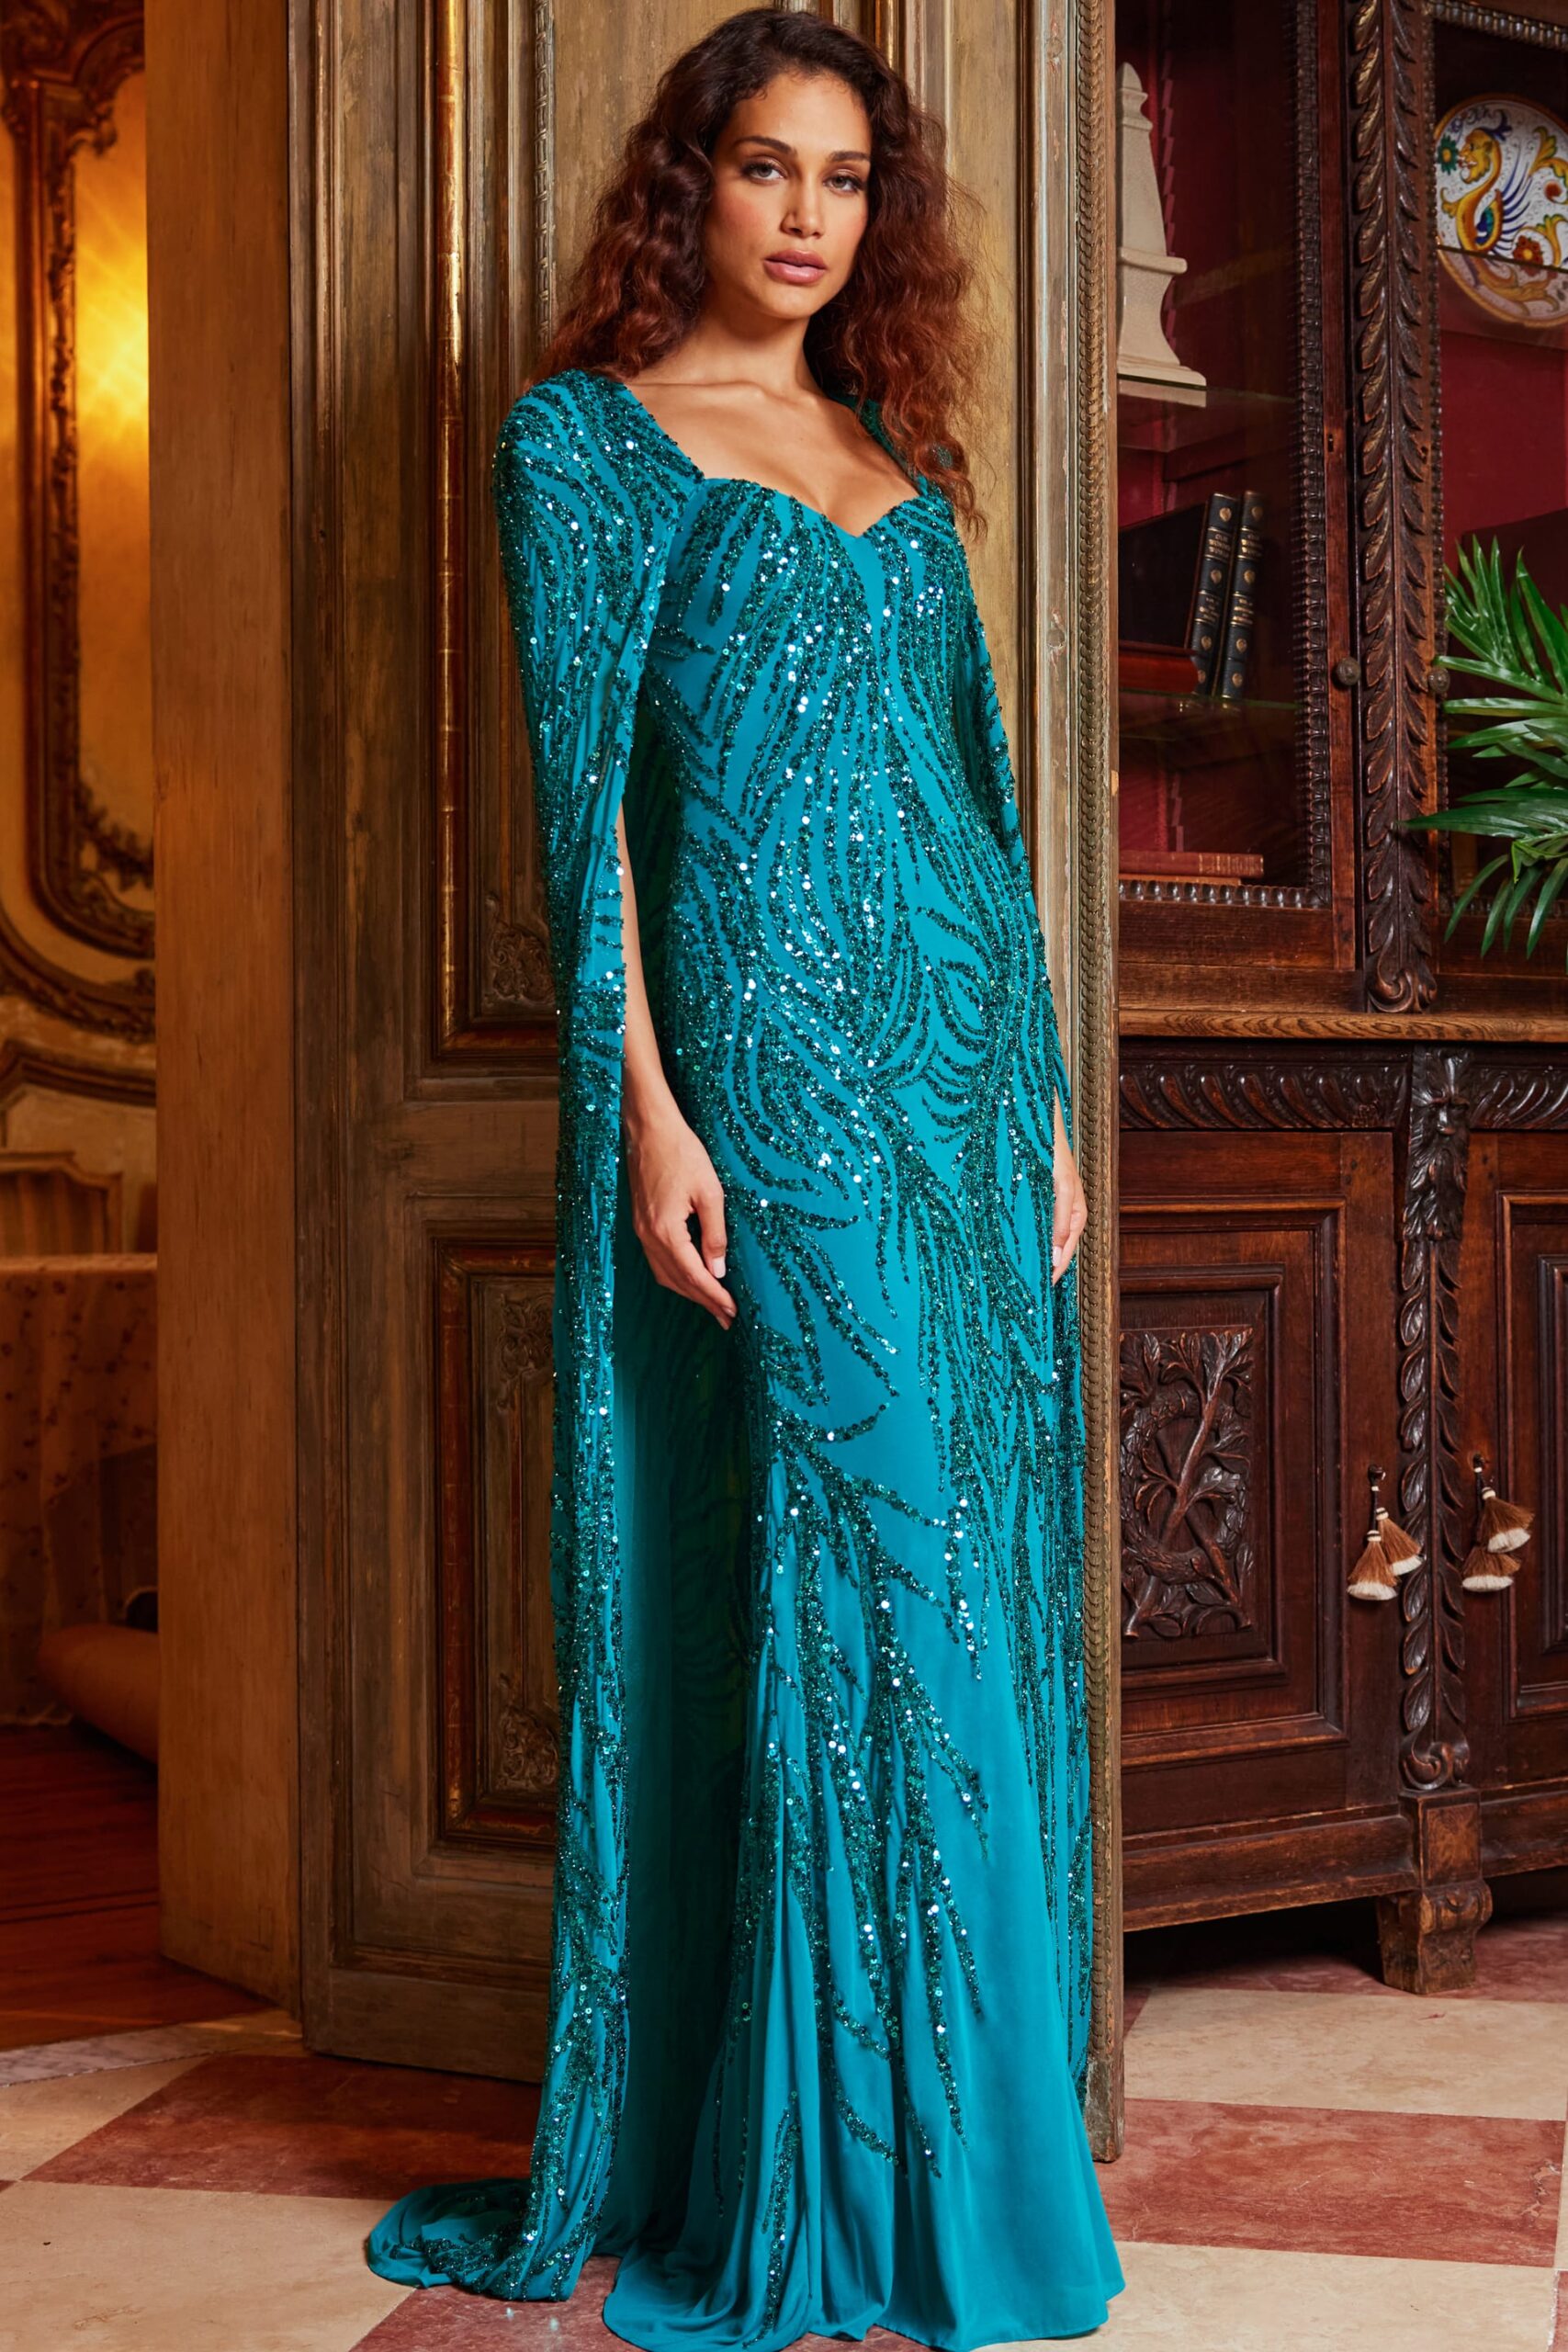 Jovani 23891 Peacock Embellished Long Cape Evening Gown